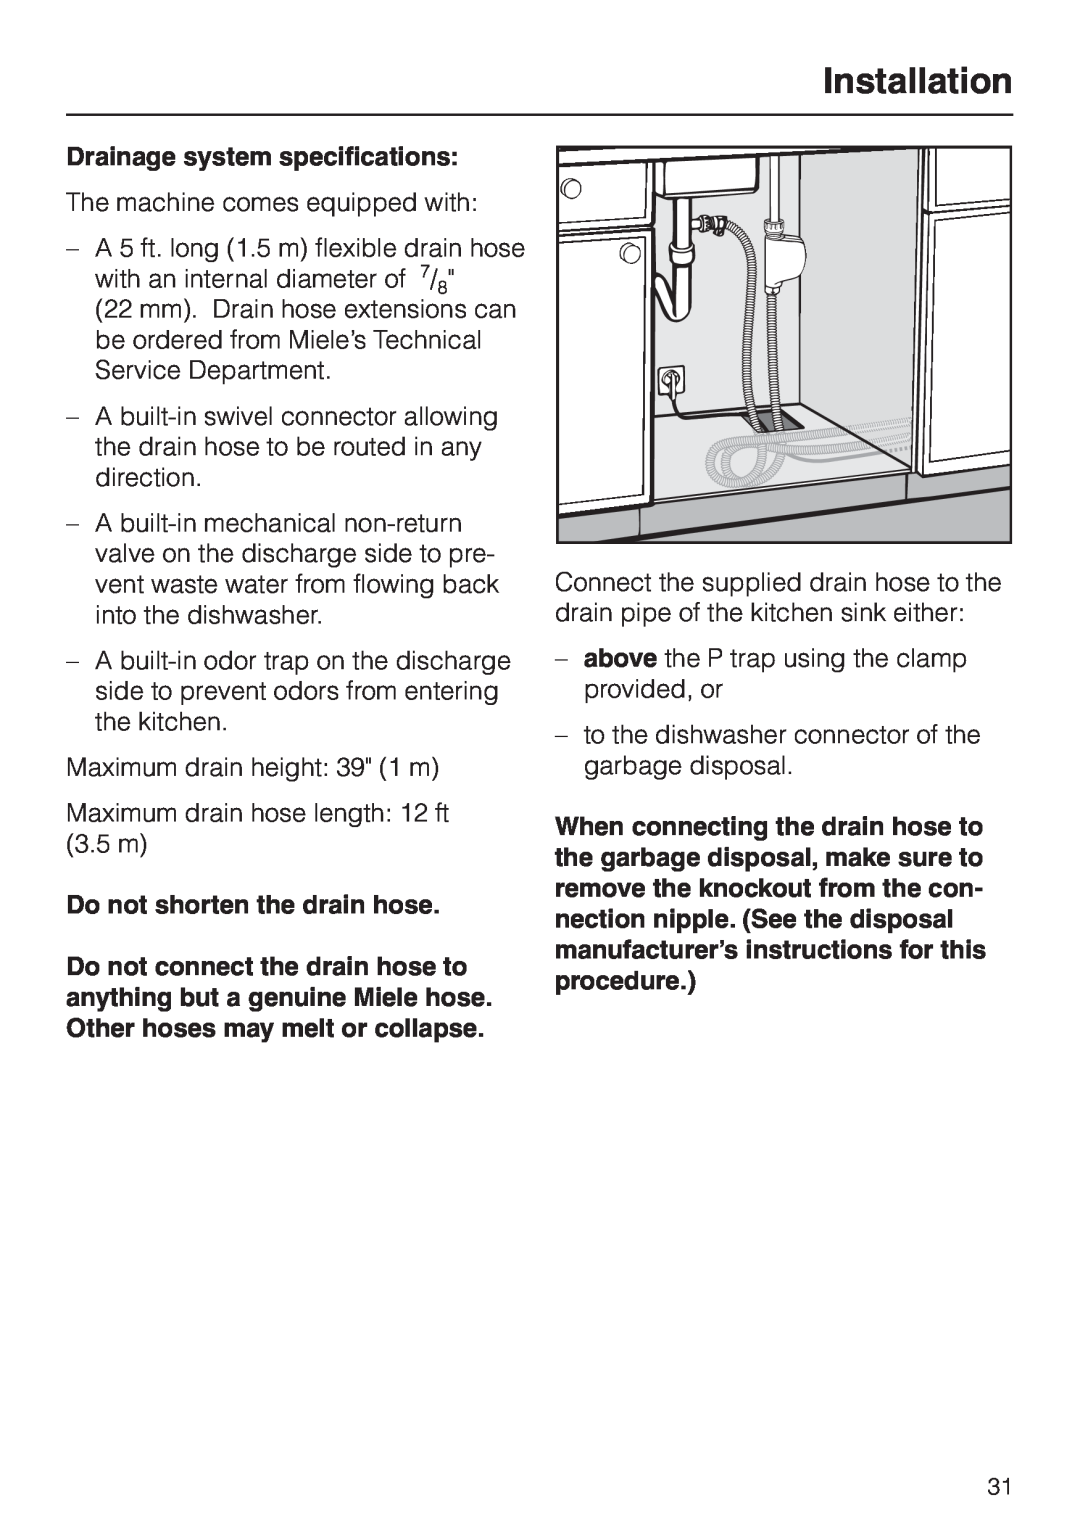 Miele HG02 Drainage system specifications, Maximum drain hose length 12 ft, When connecting the drain hose to, 3.5 m 